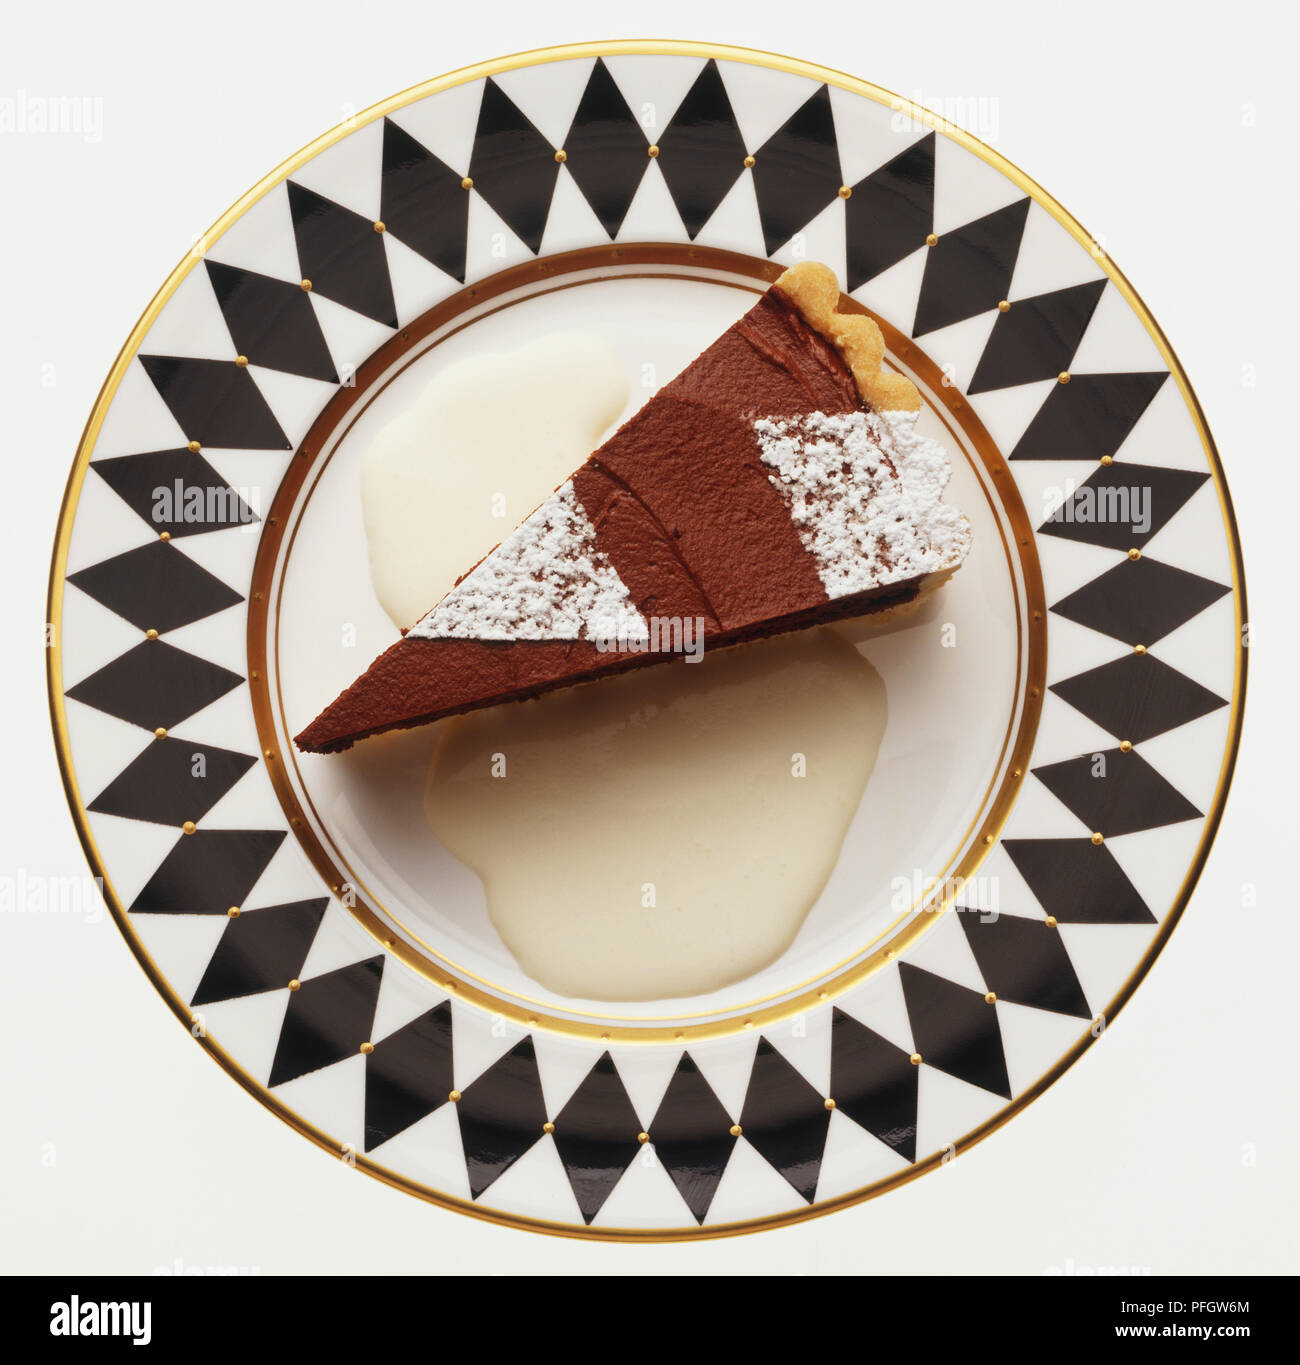 A piece of chocolate tart sprinkled with icing sugar, served with cream on a decorative black and white patterned plate, view from above Stock Photo